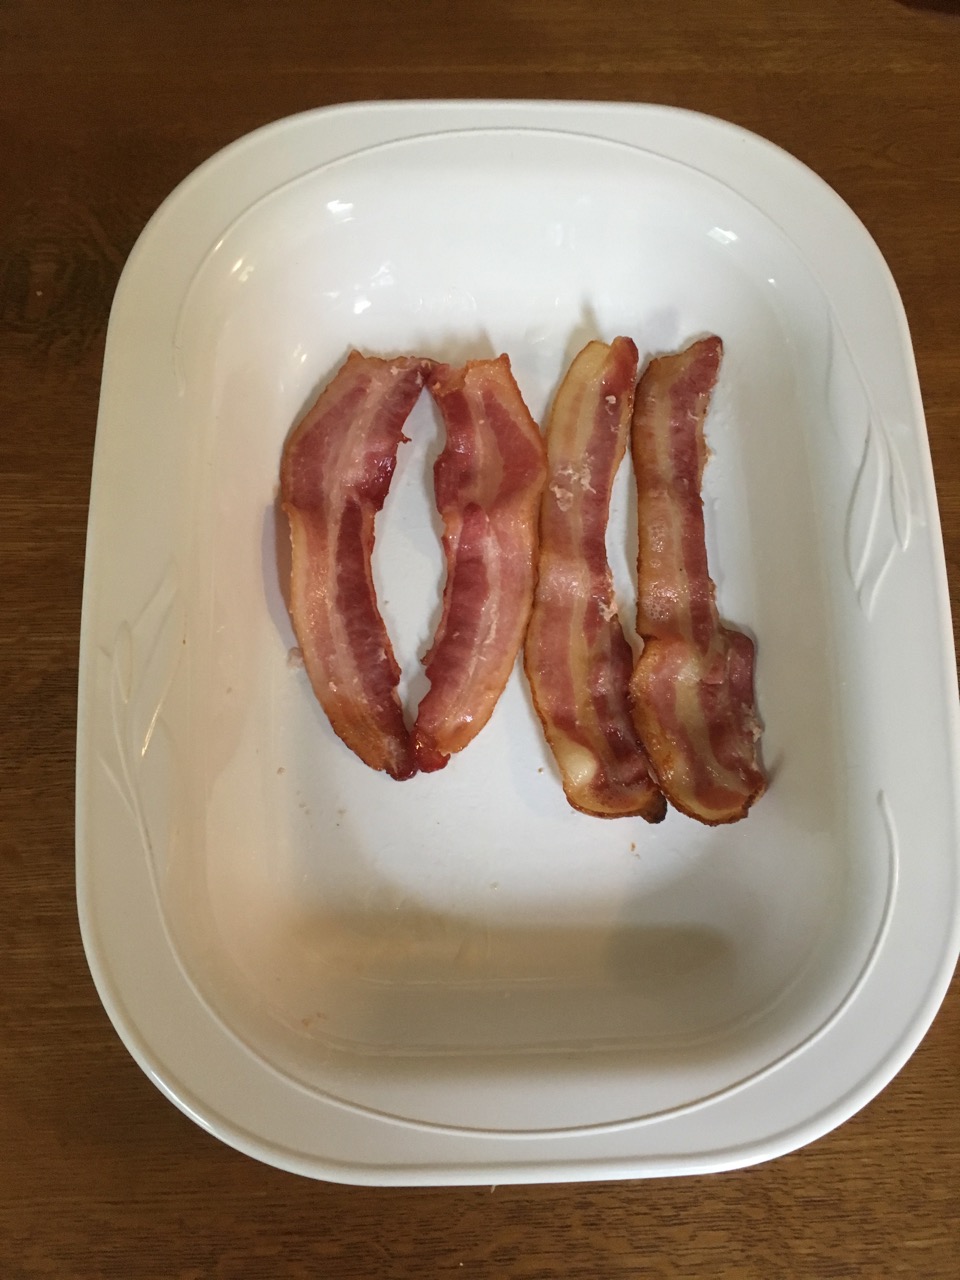 How Many Calories in Bacon? Common Science Space